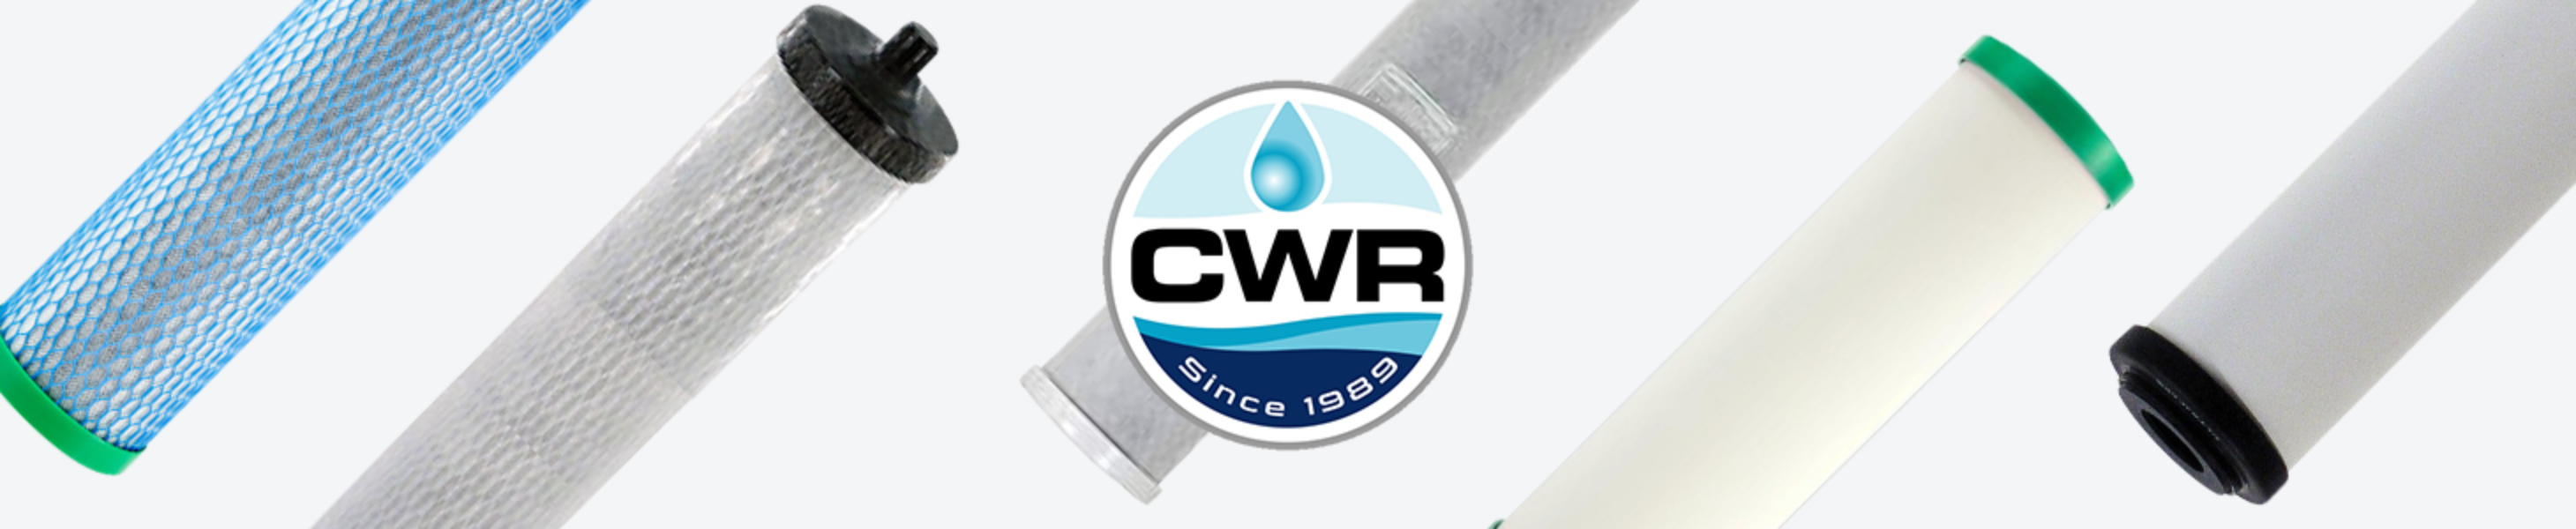 CWR water filters filter out micro-plastics Answer 2